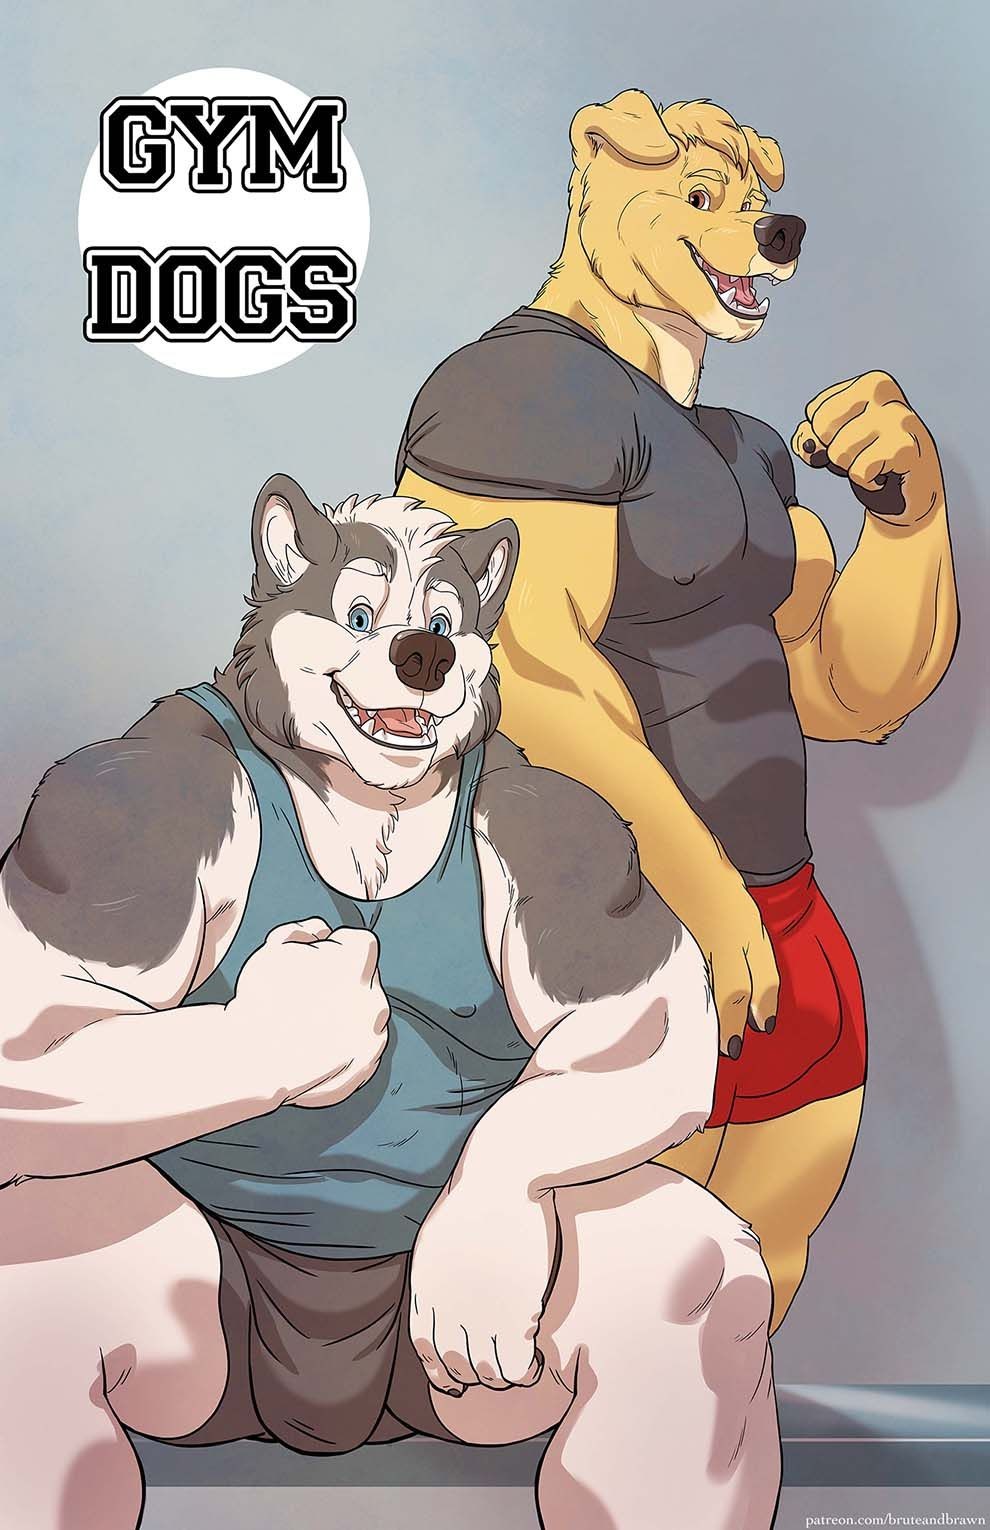 Defloration With Dog - Defloration Gym Dogs By Brute And Brawn Funny â€“ Hentai.bang14.com